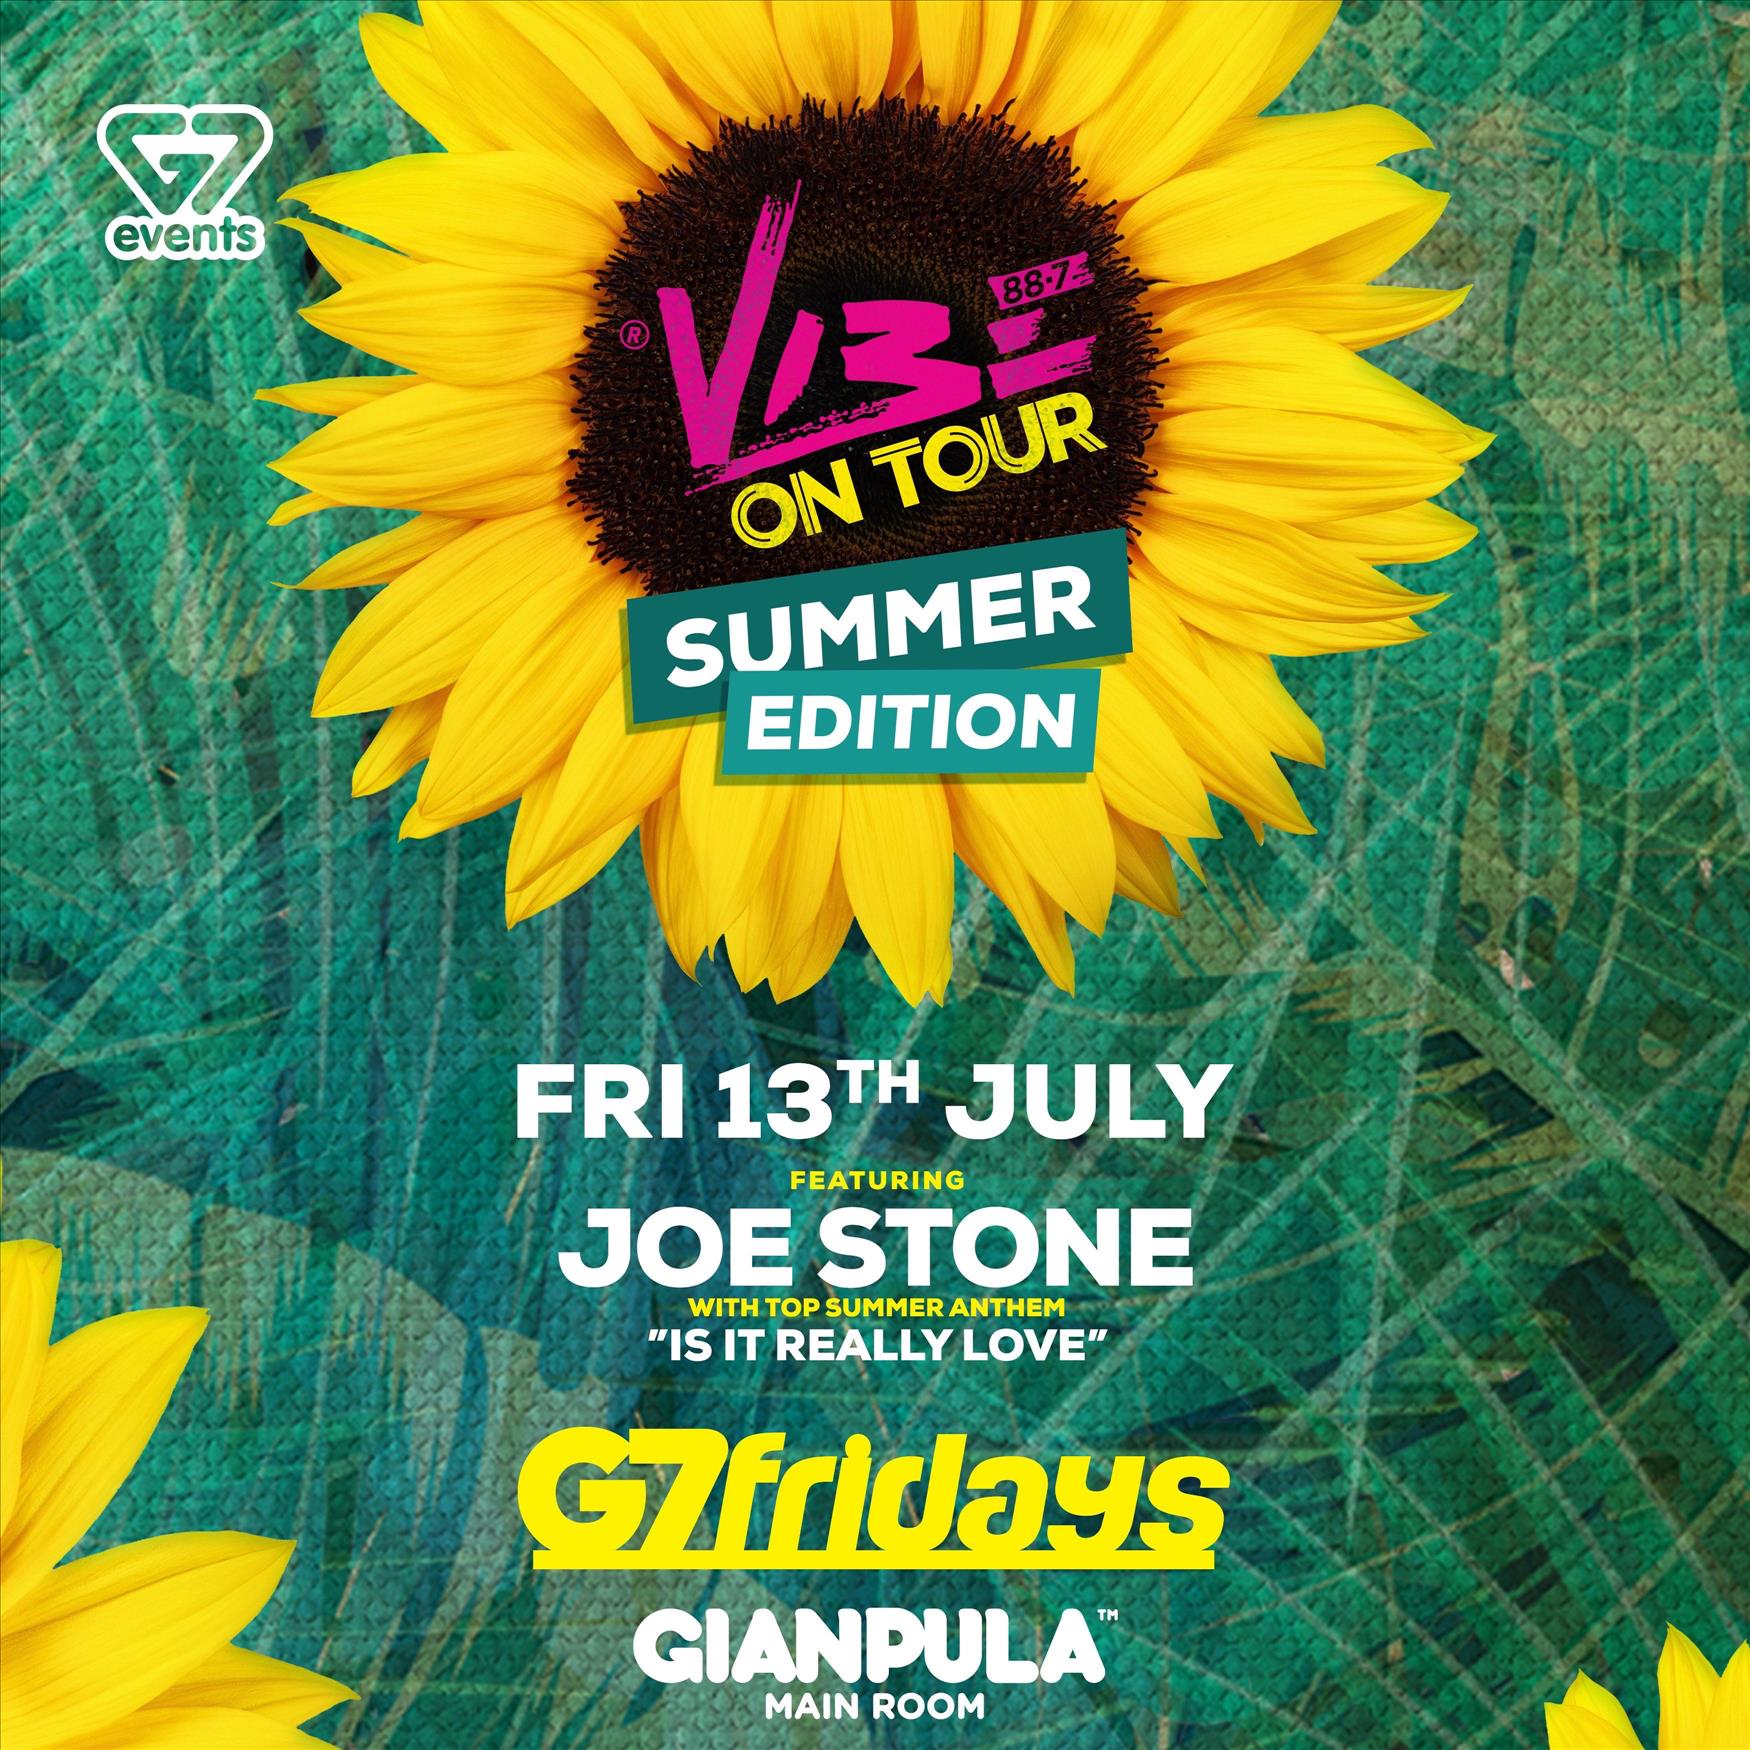 Vibe on Tour Summer Edition at G7 Fridays ft. Joe Stone poster